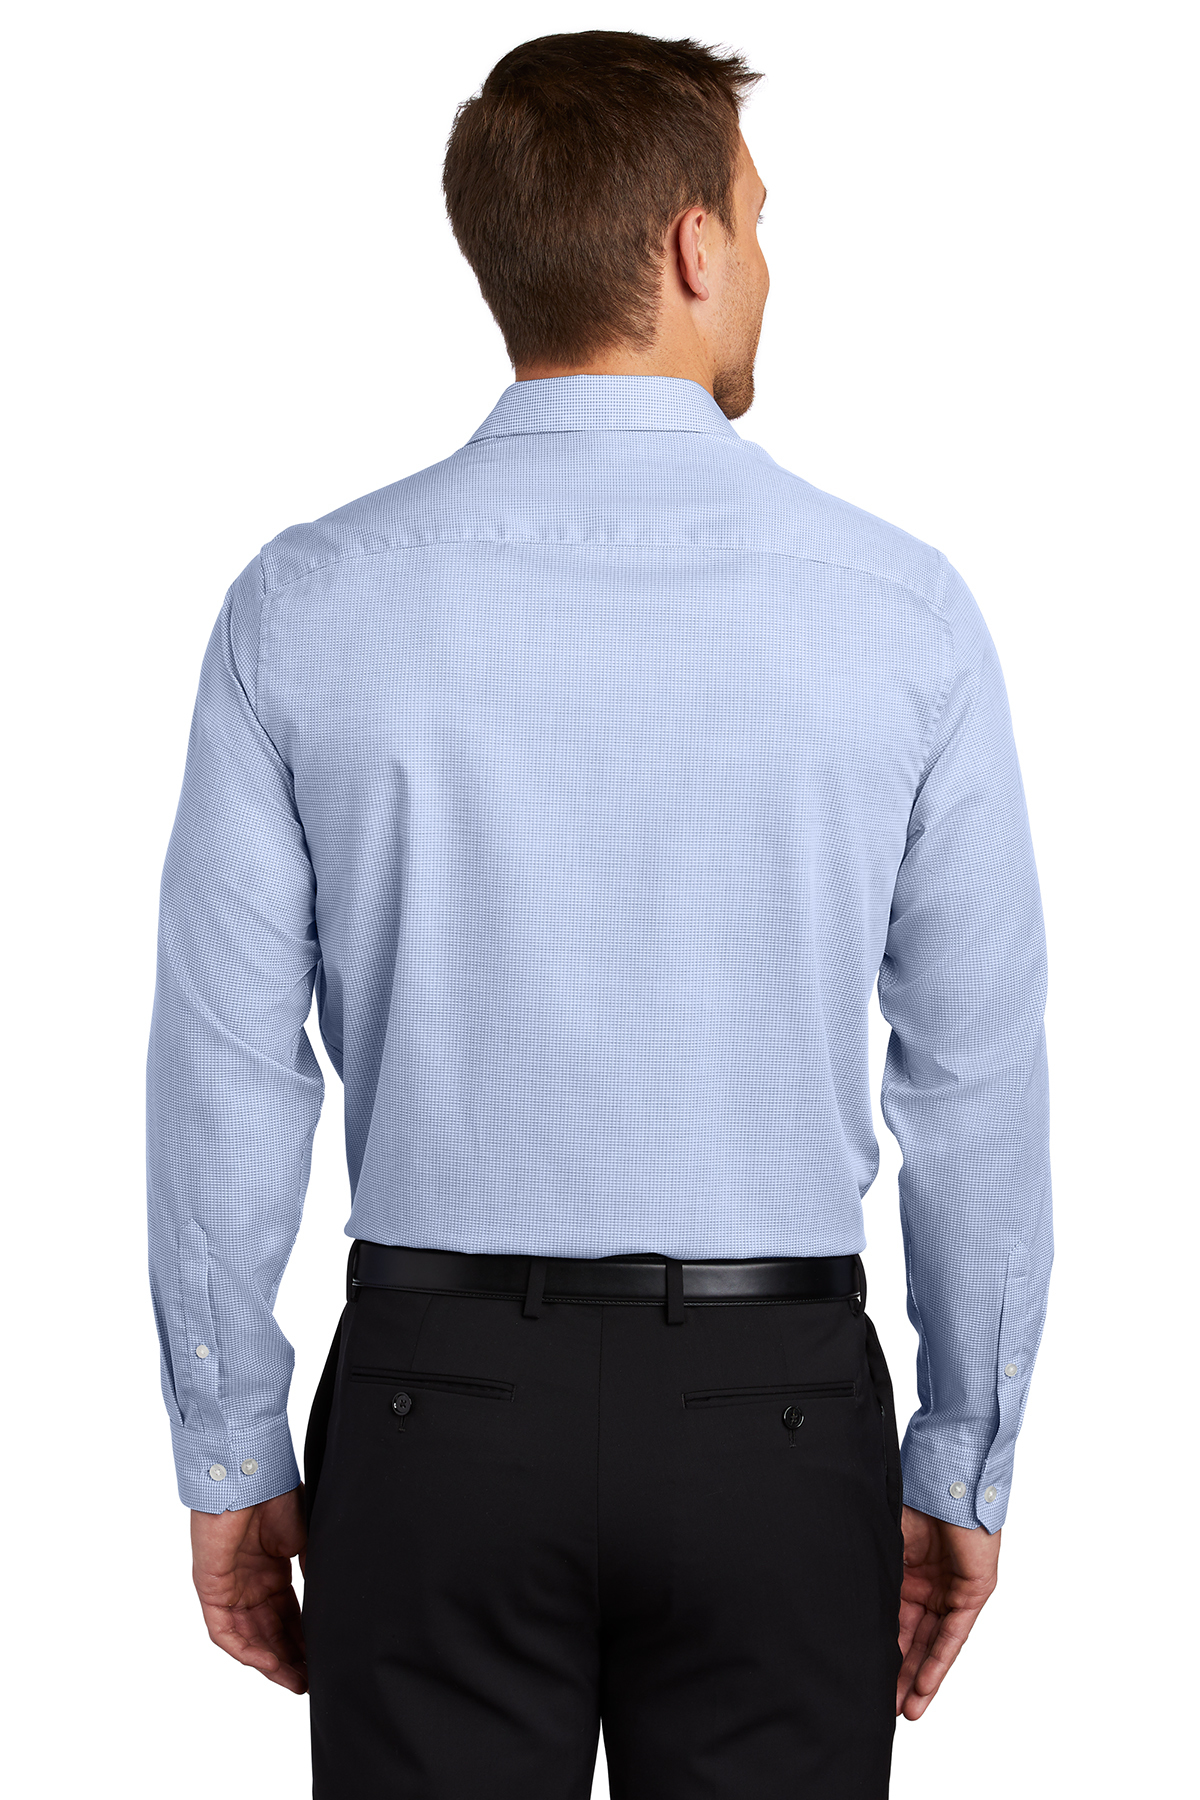 Port Authority Pincheck Easy Care Shirt | Product | SanMar